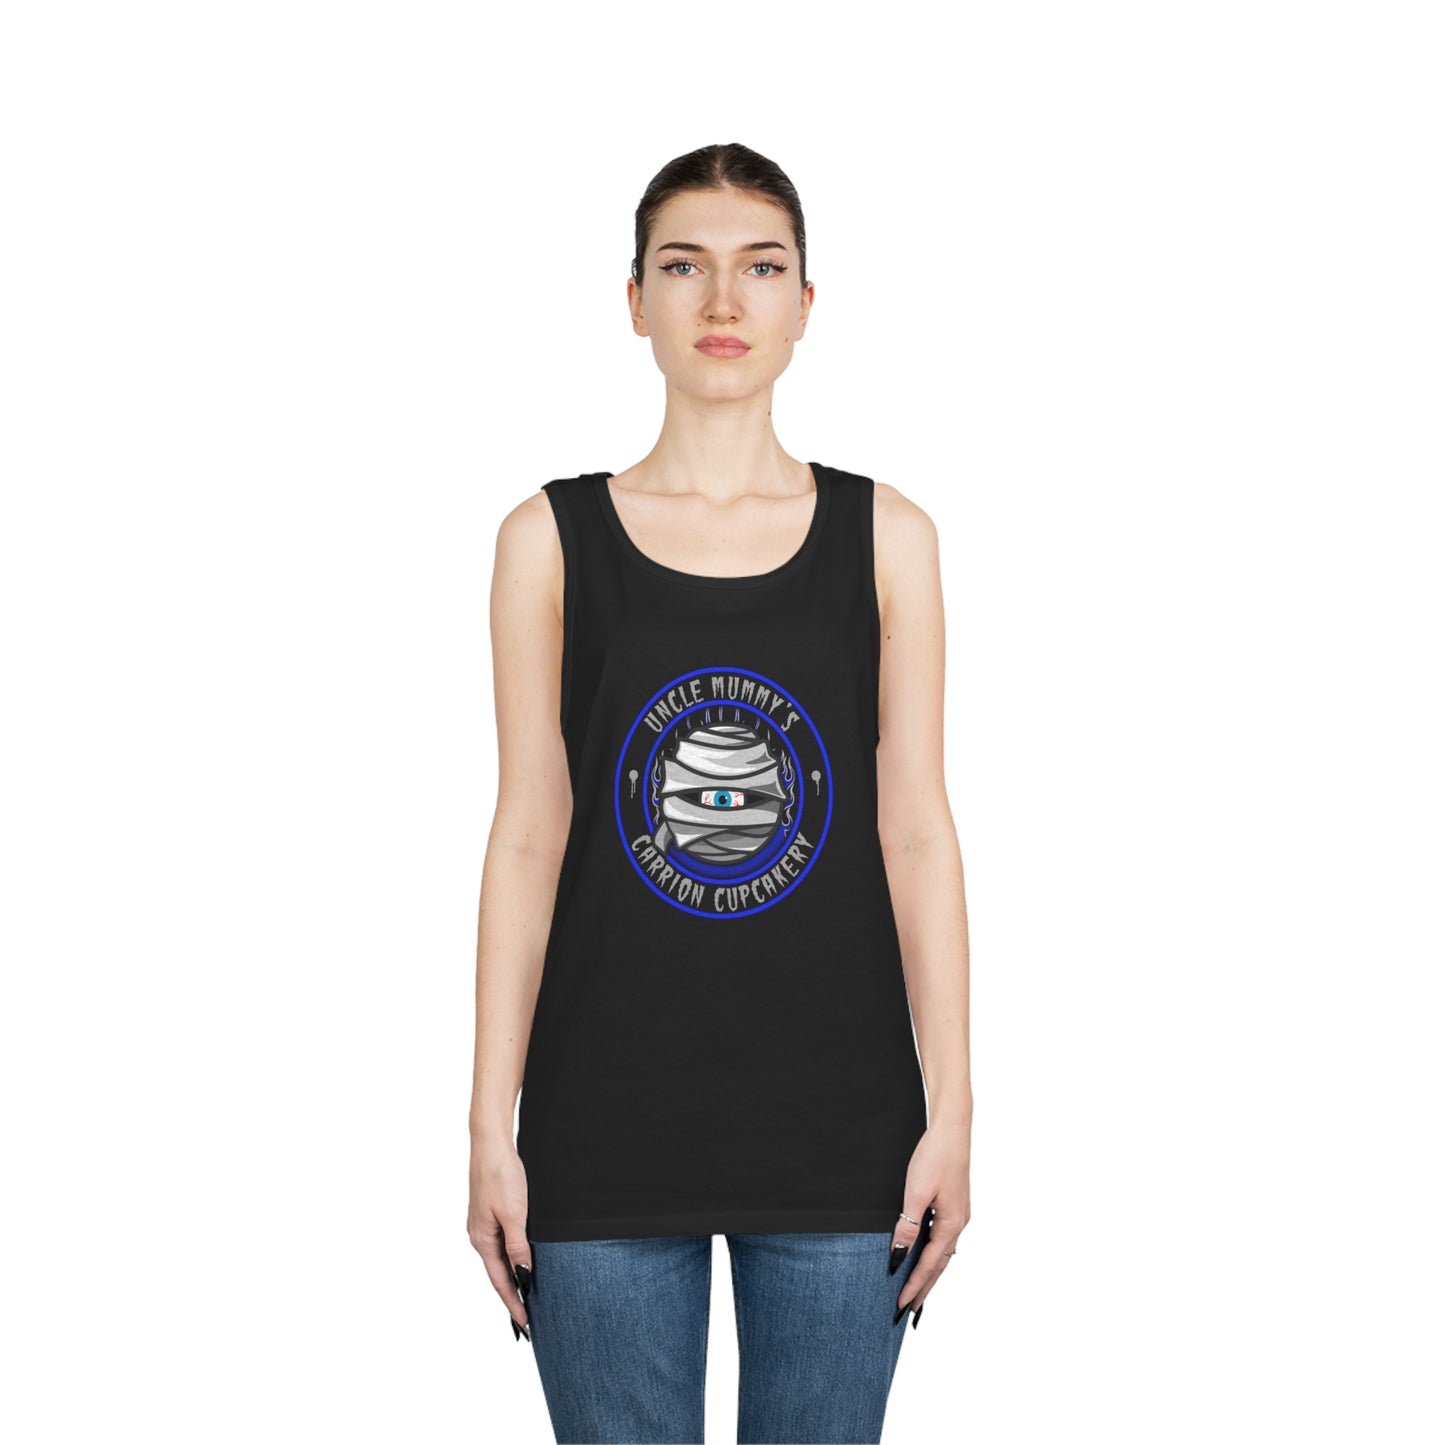 UNCLE MUMMY - CARRION CUPCAKERY  Unisex Heavy Cotton Tank Top